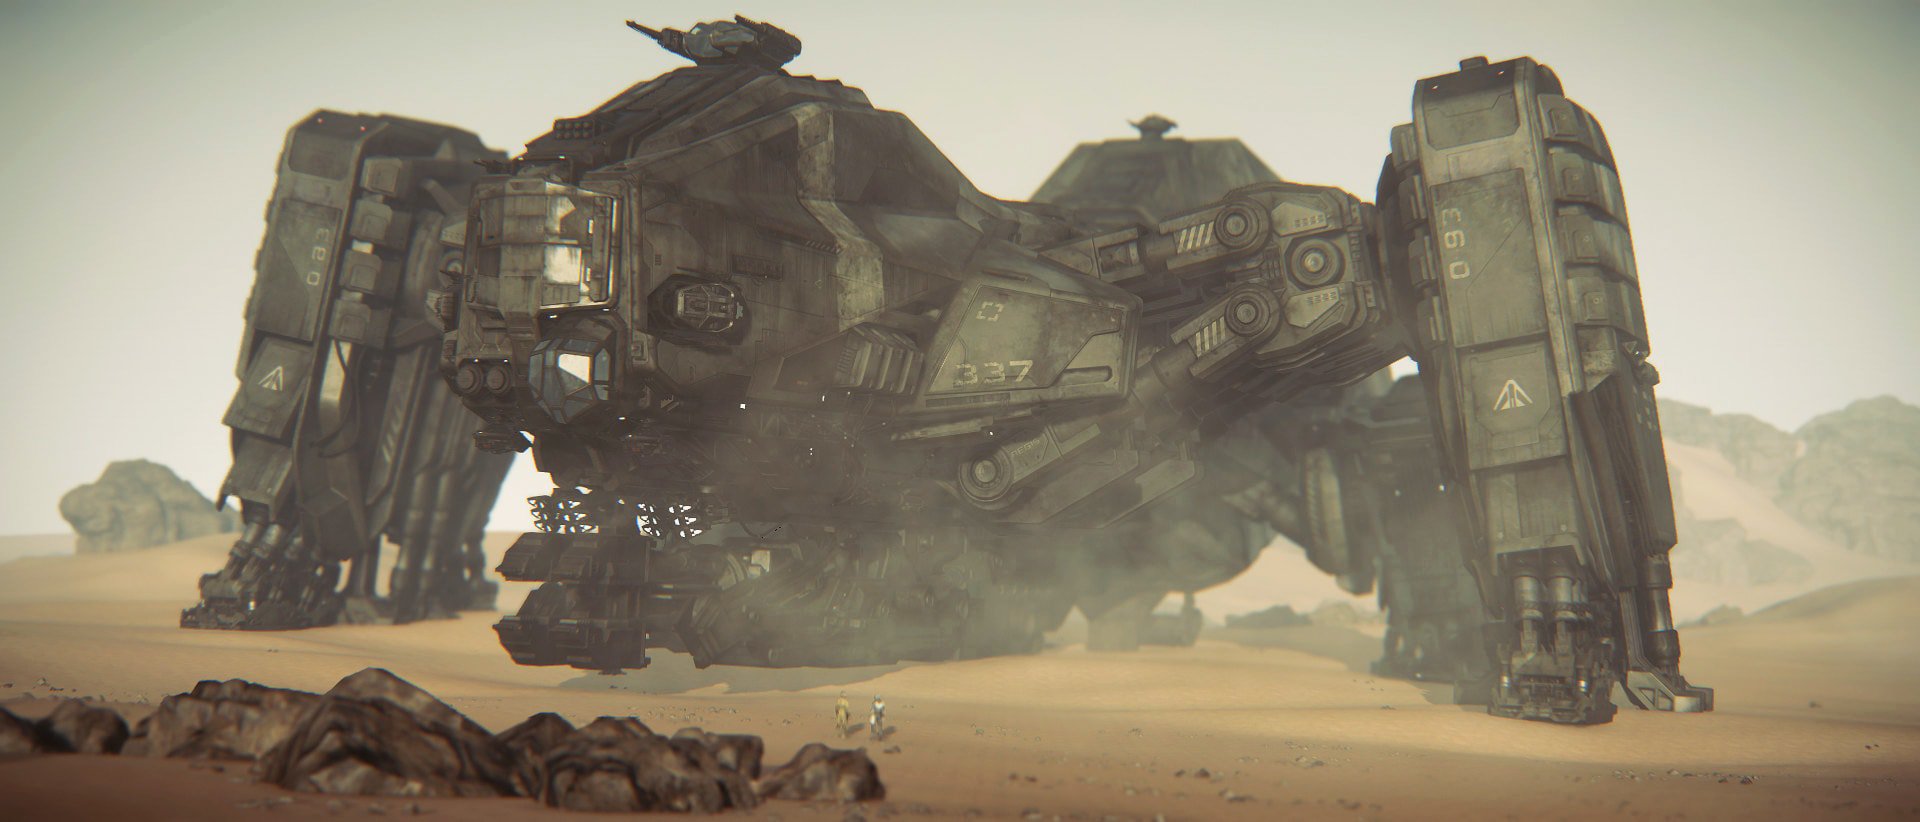 Star Citizen Alpha 3.6: Hover ships, space stations, and the law warp in